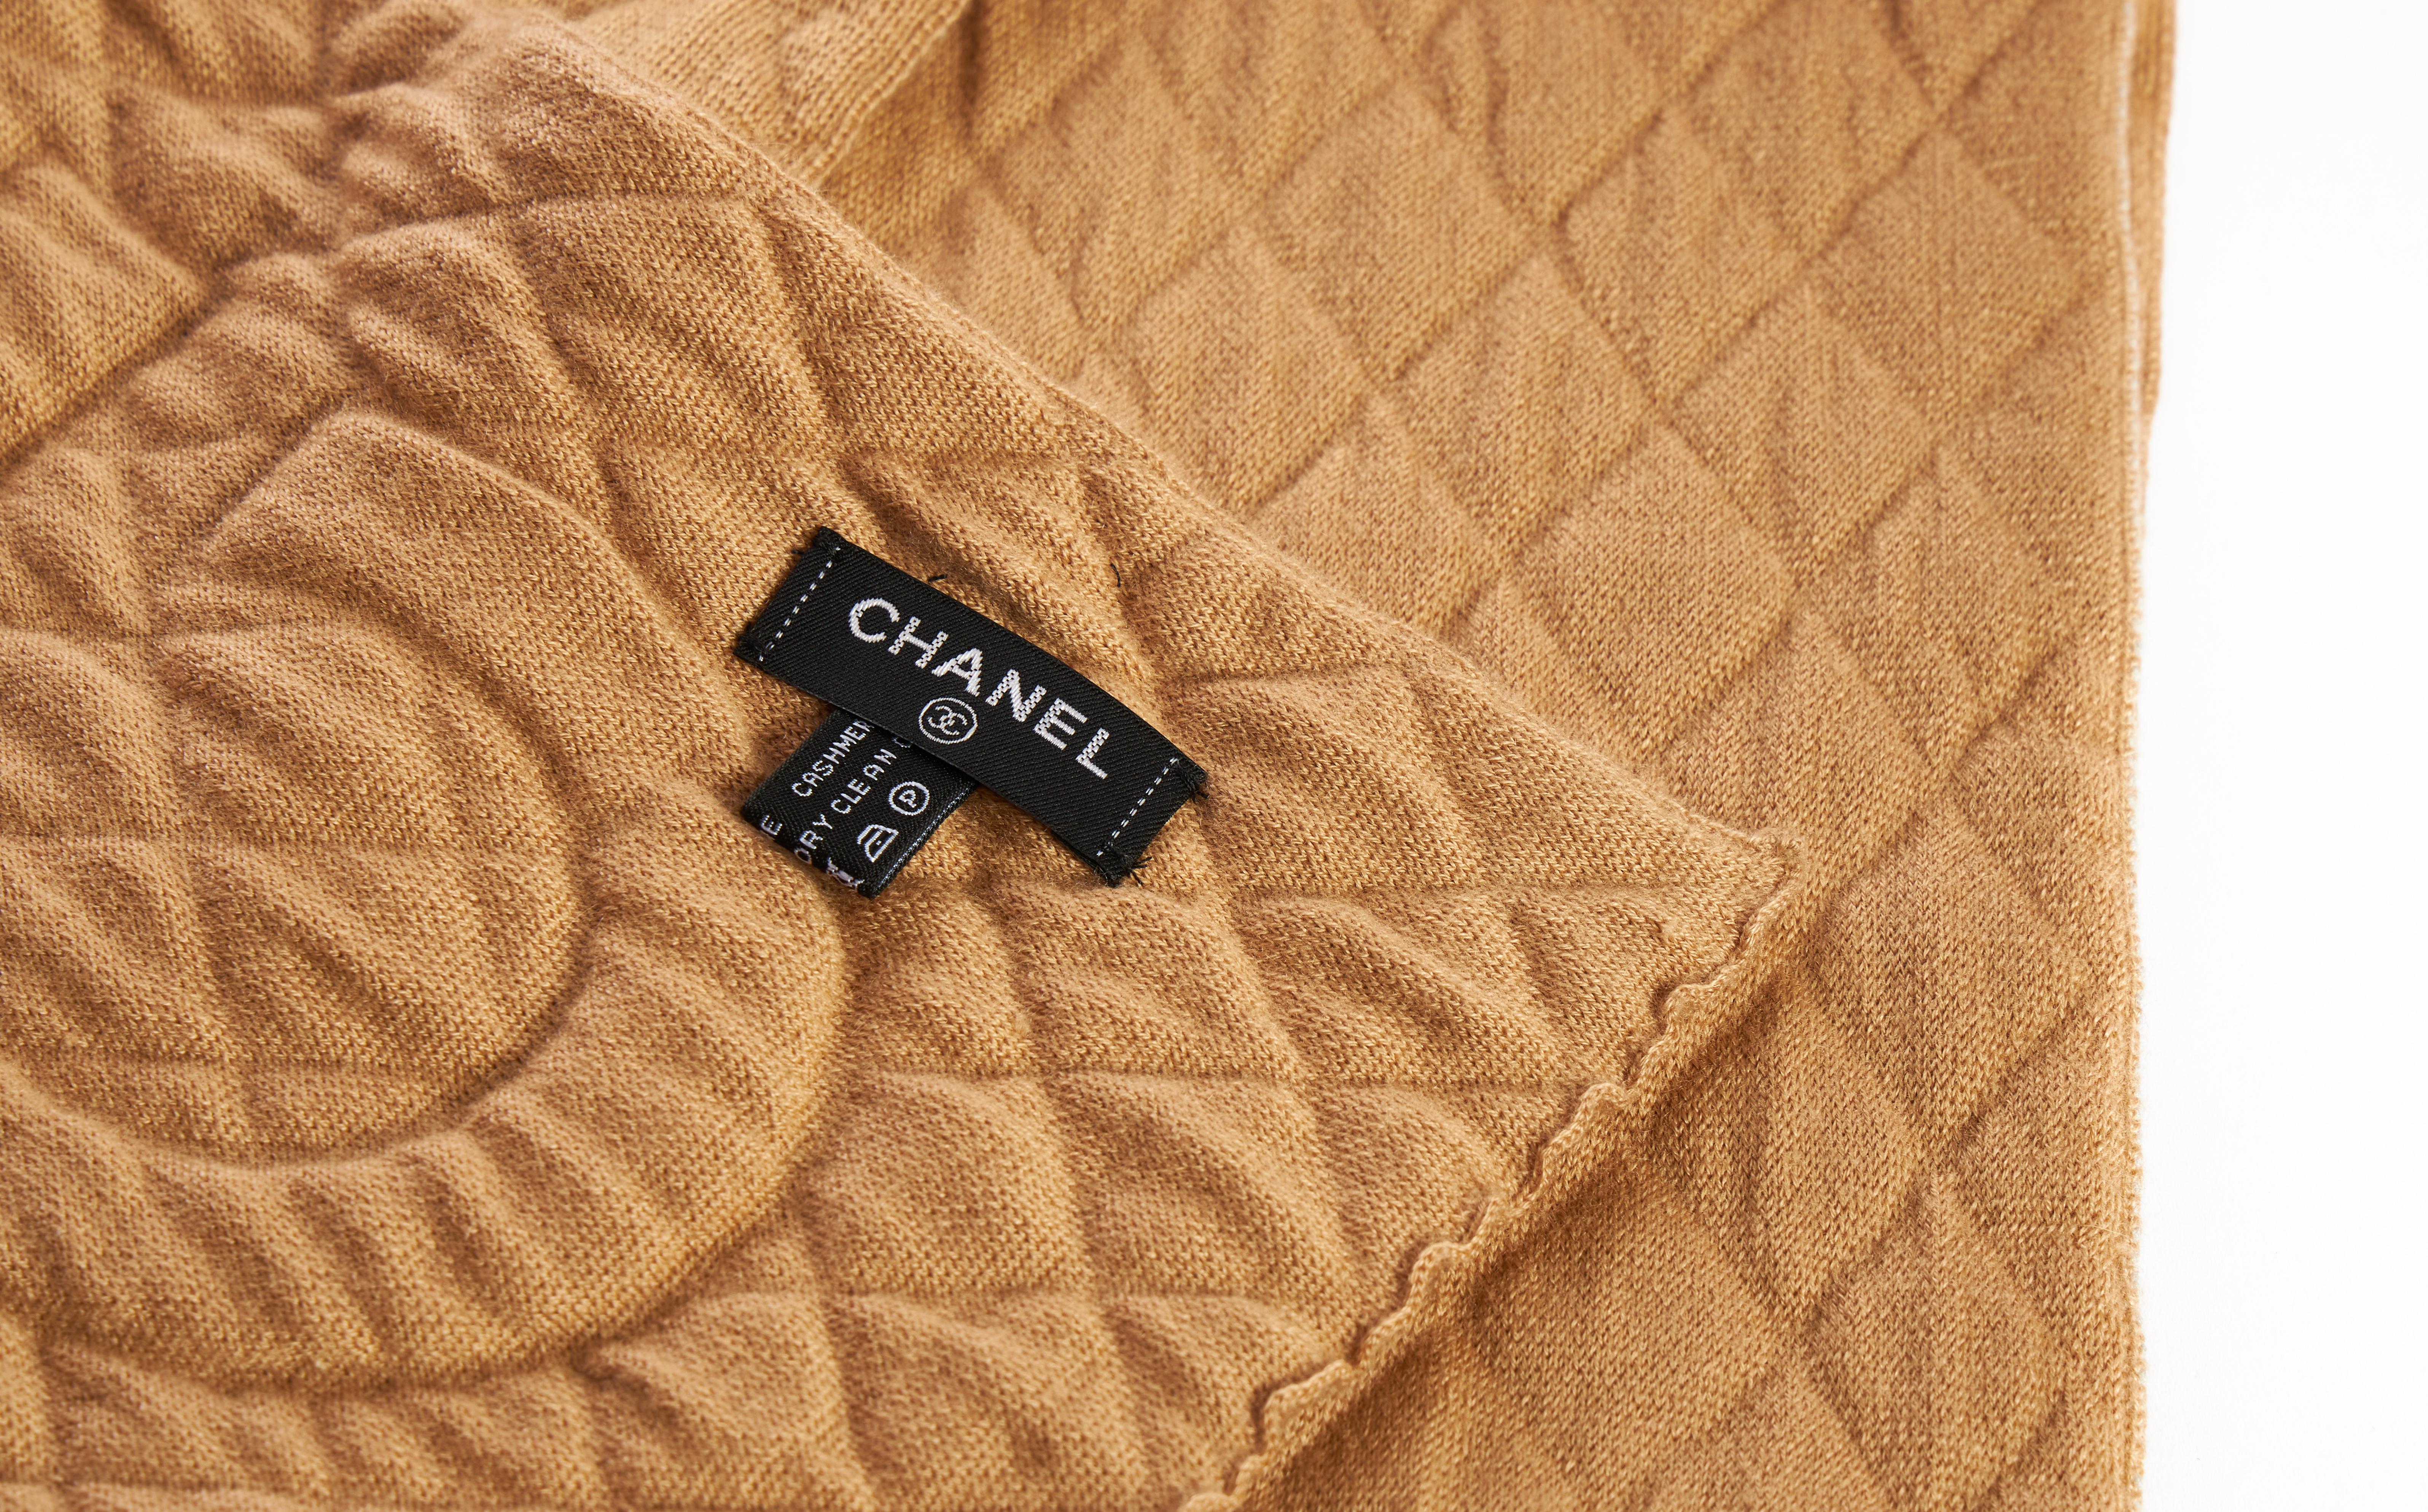 Chanel brand new and rare camel brown cashmere set. Beanie, gloves (small size 6 1/2) and quilted scarf. Come with original care tag.